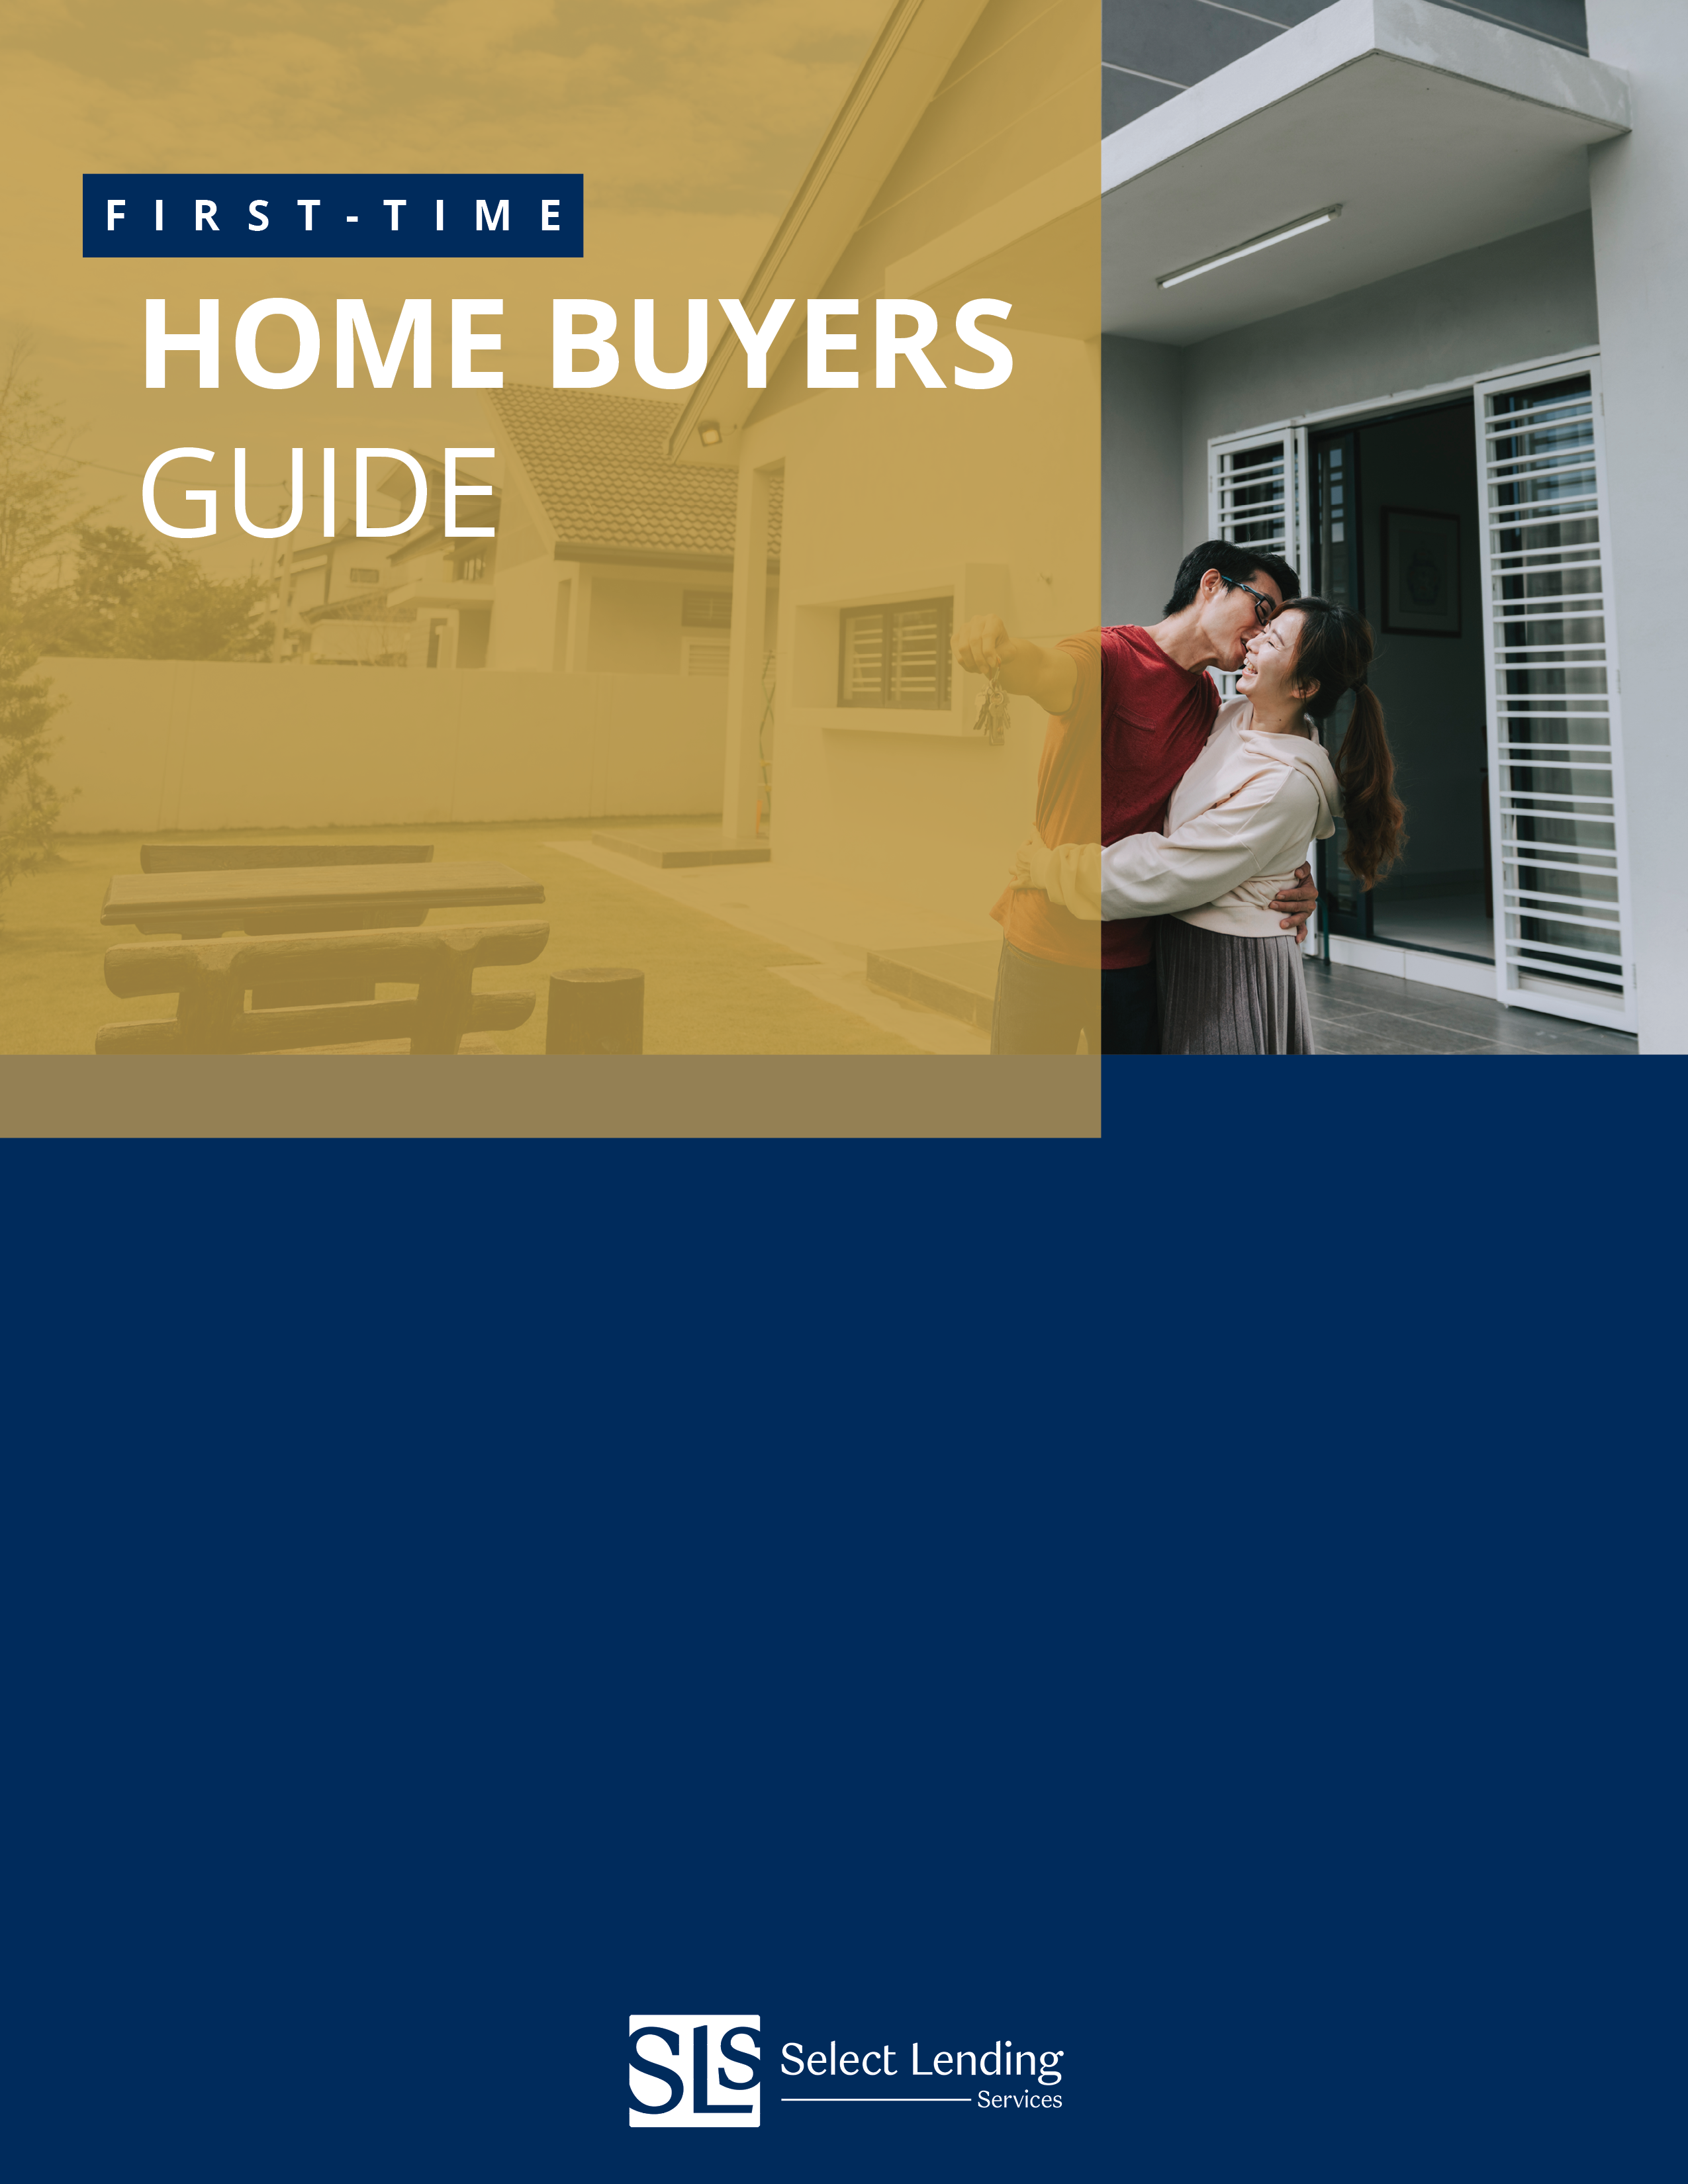 First Time Home Buyers Guide